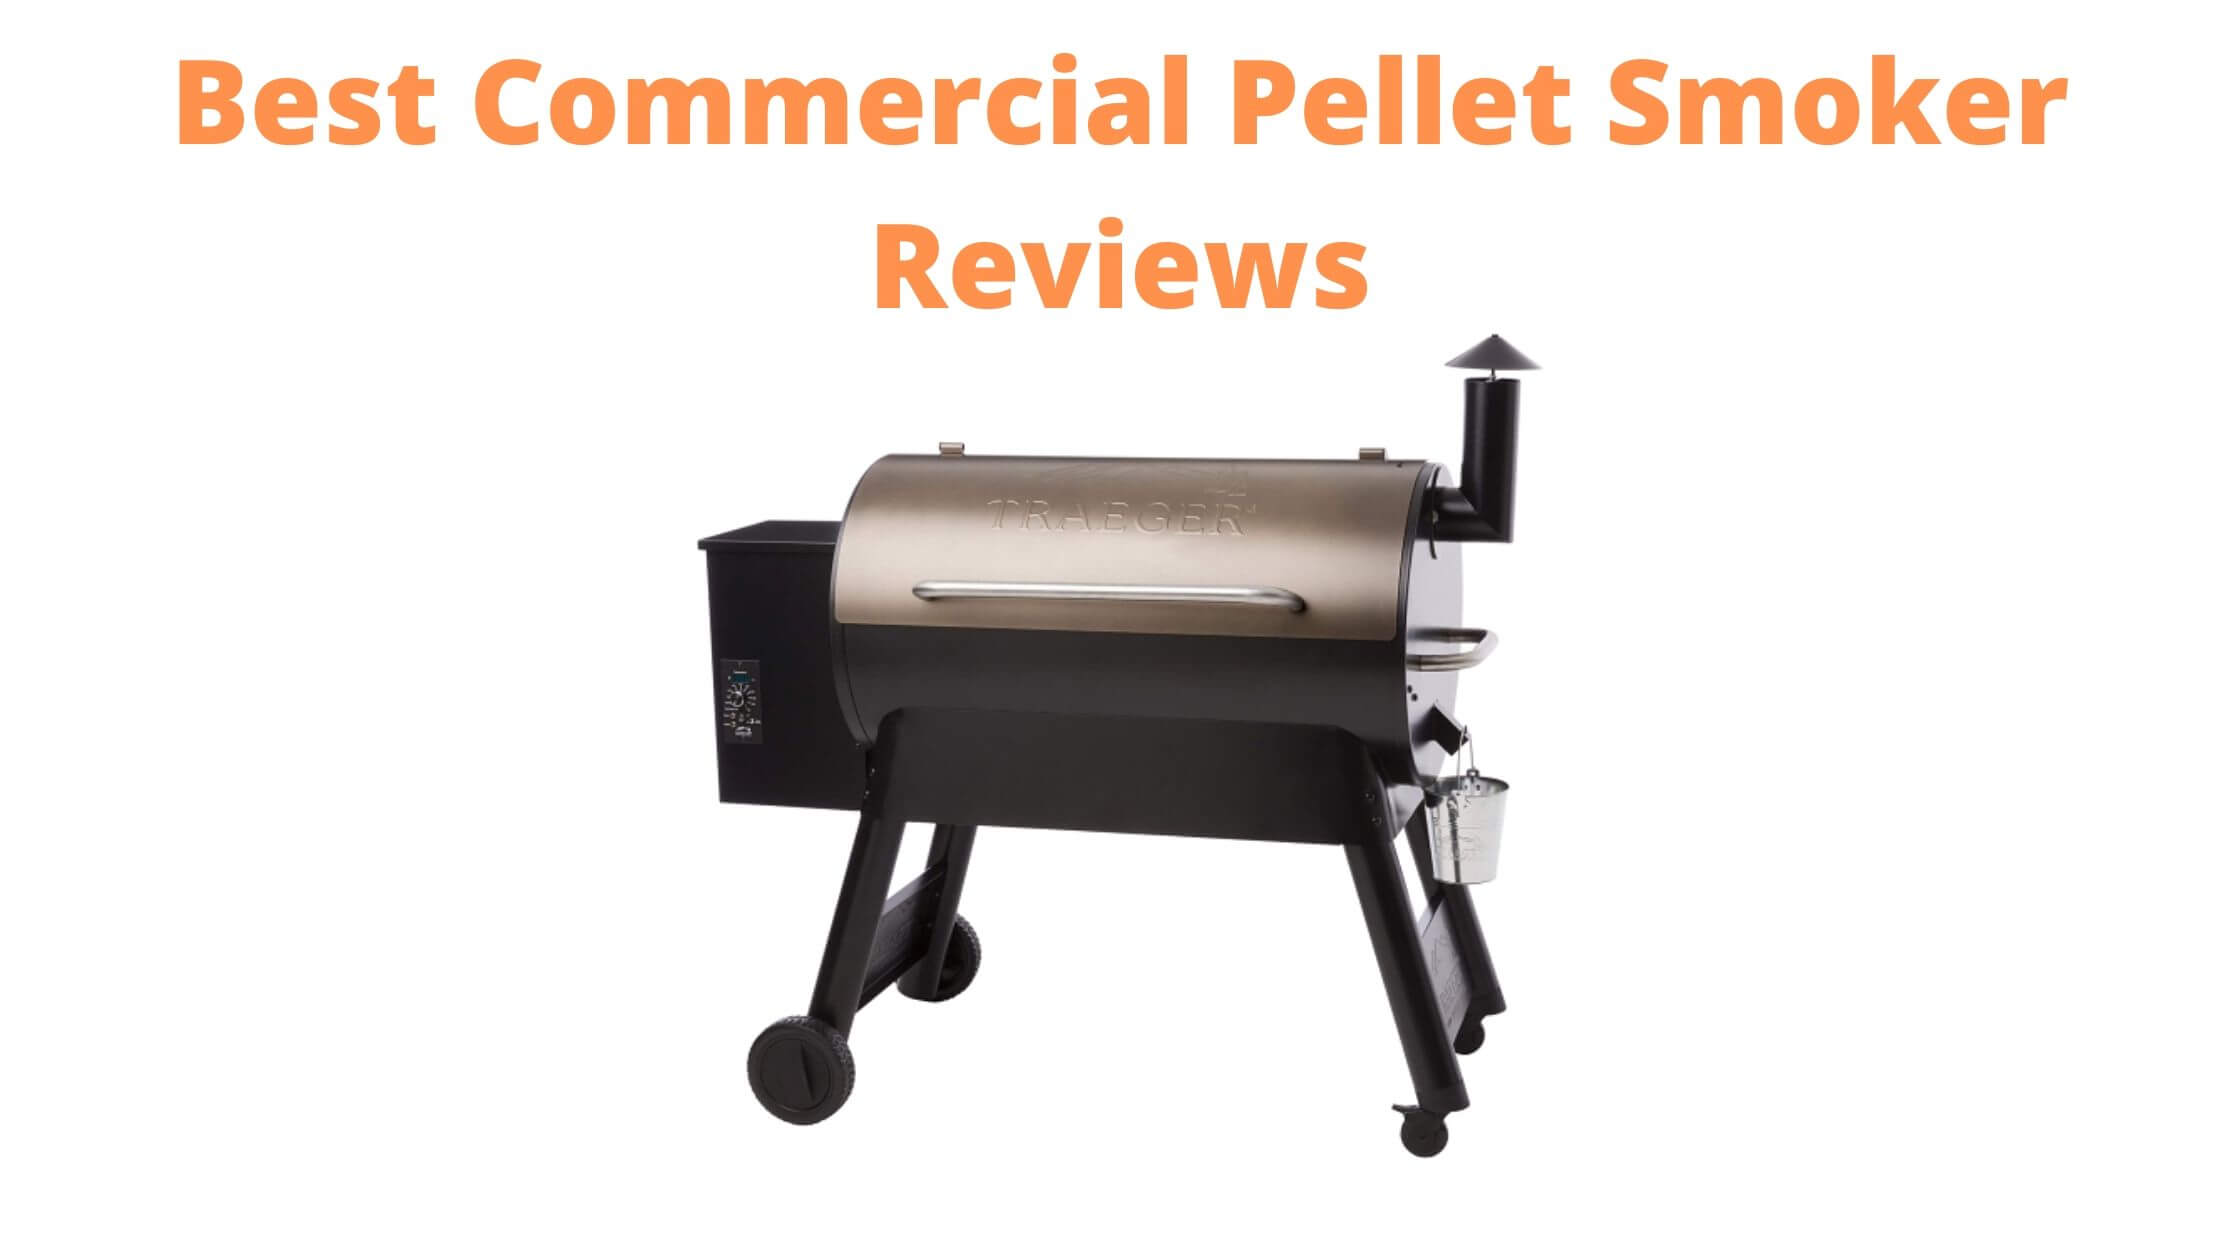 5 Best Commercial Pellet Smoker And Grills Reviews 2020,Italian Word For Grandma And Grandpa